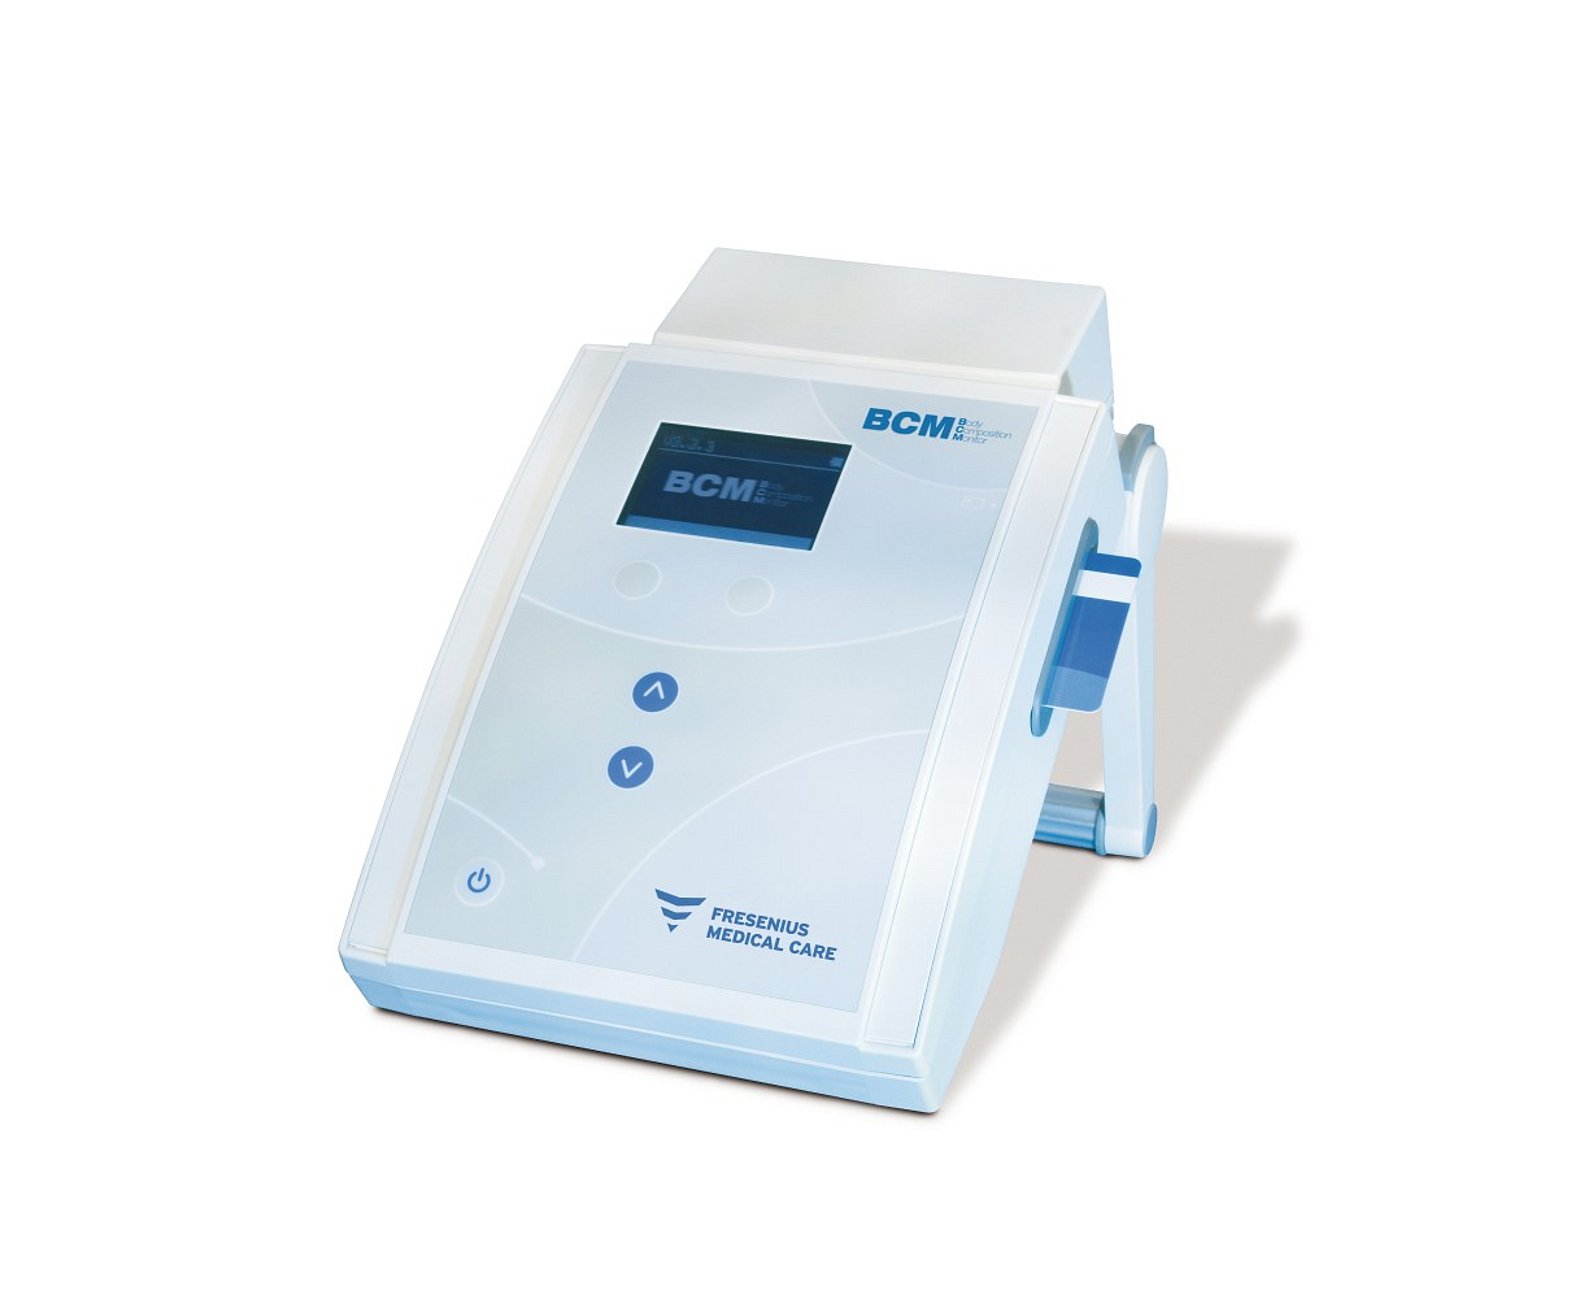 A BCM — Body Composition Monitor